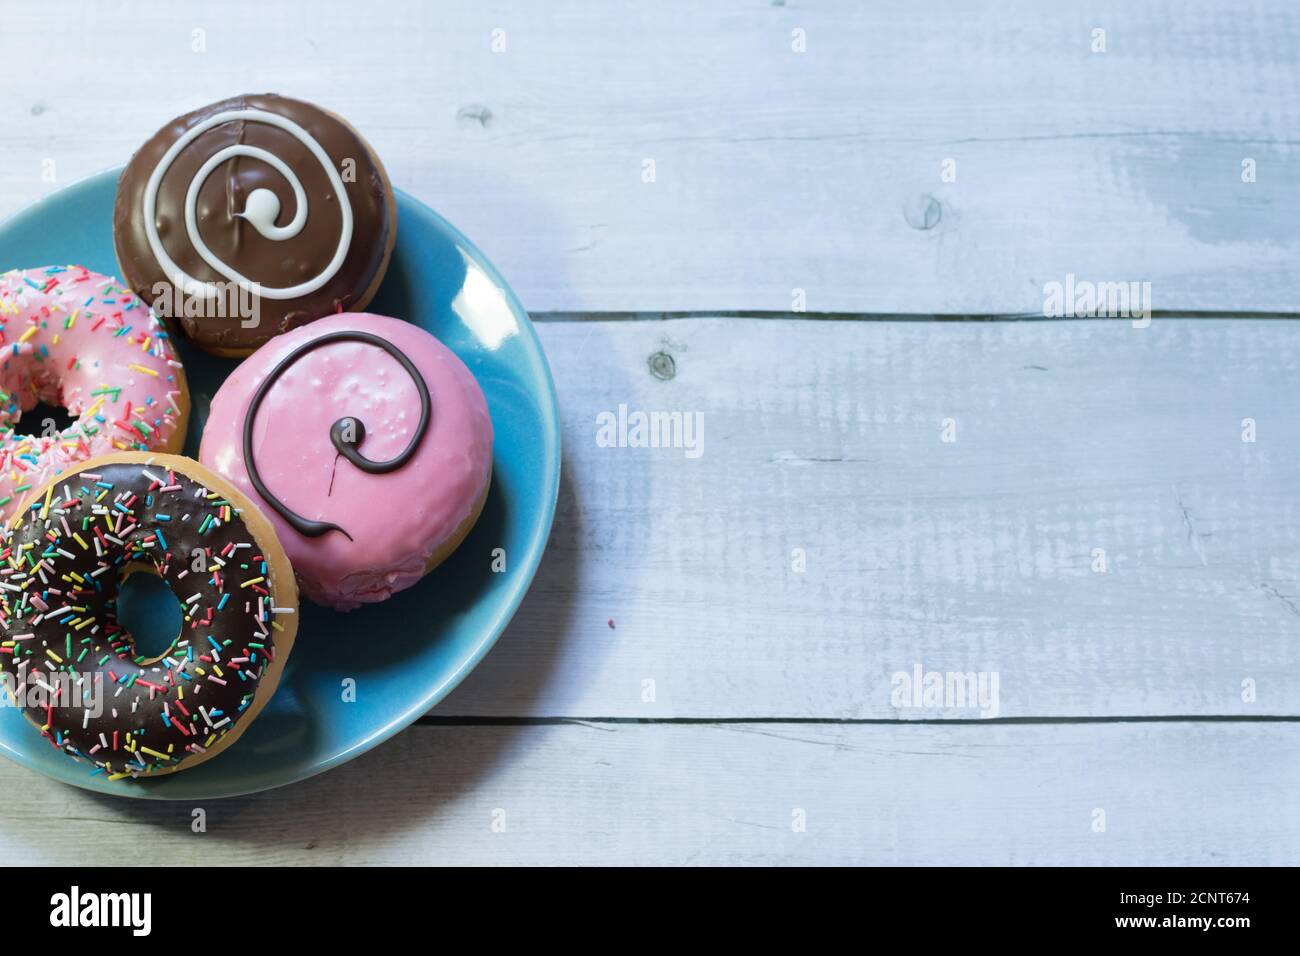 top view of a plate of donuts on a blue plate on a wooden table Stock Photo